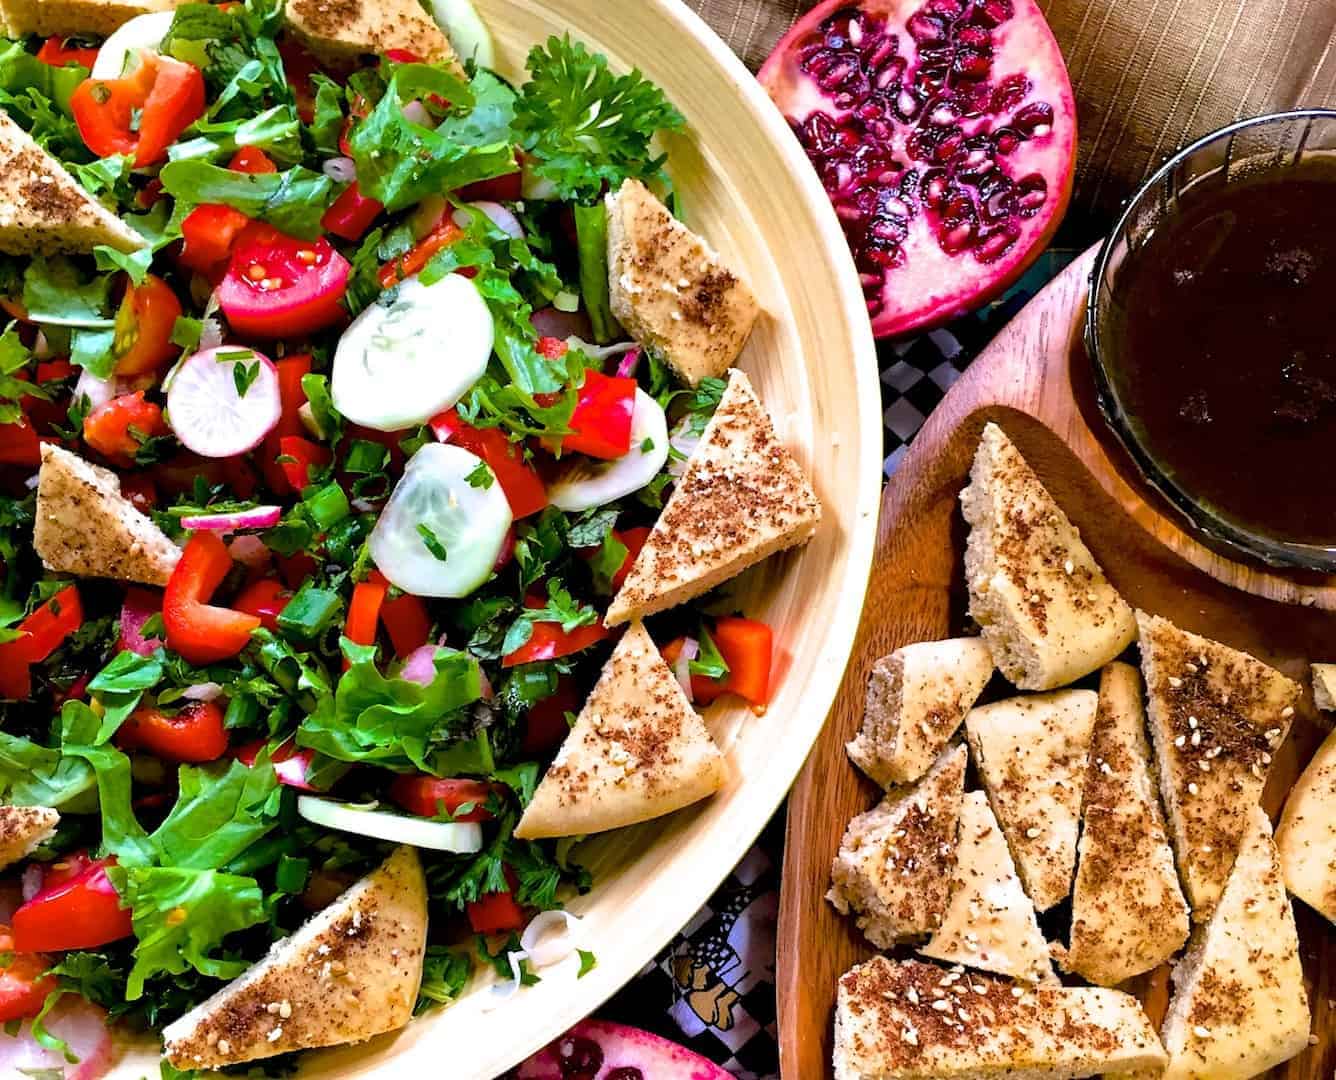 A plate of Fattoush Lebanese bread salad with traditional ingredients sumac, za'atar with pita bread, radish, tomato, greens and pomegranate molasses